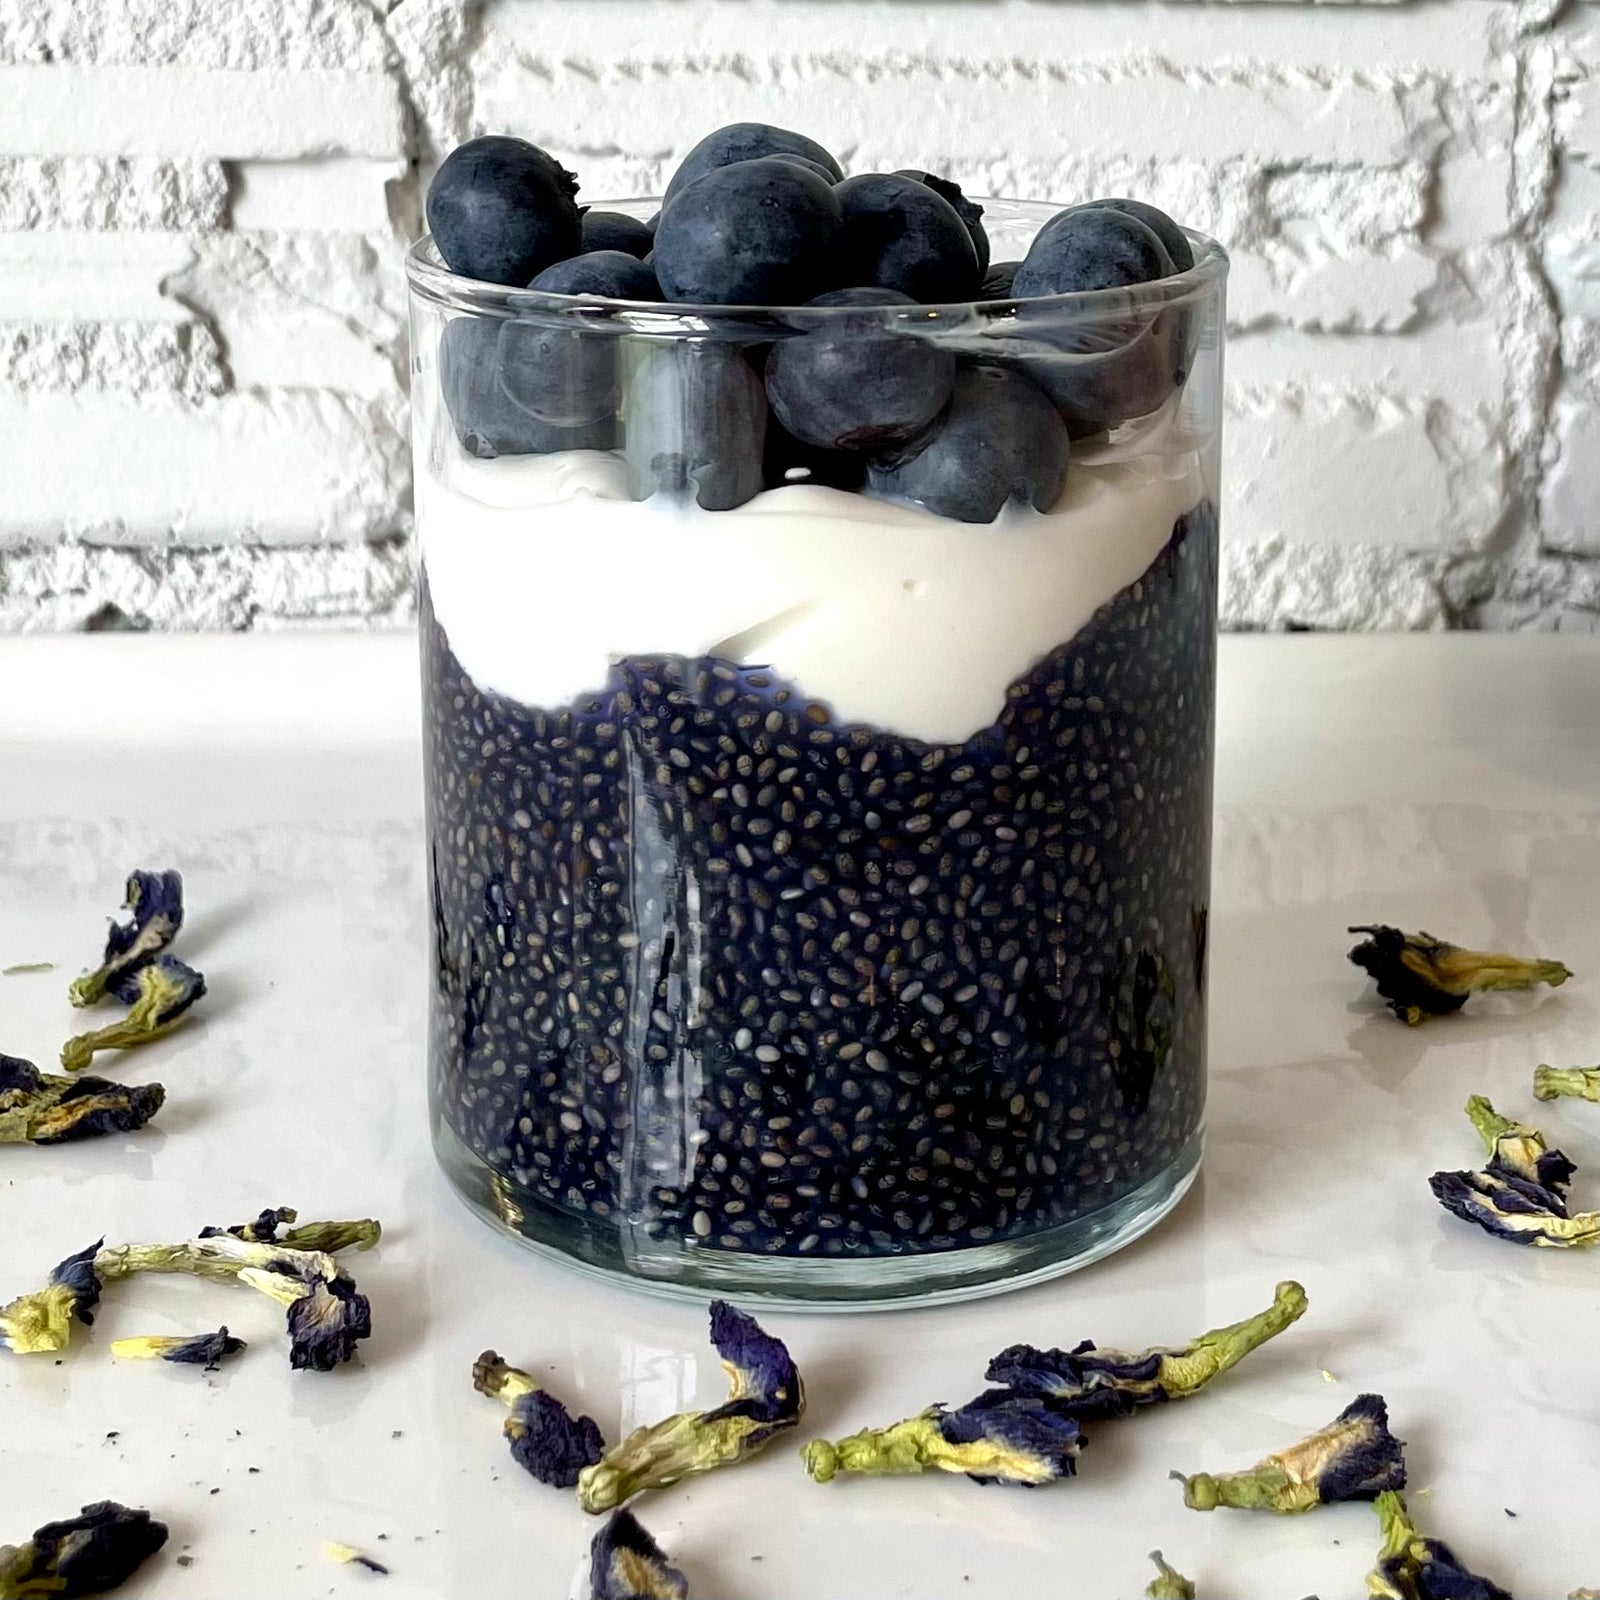 Butterfly Pea Chia Pudding